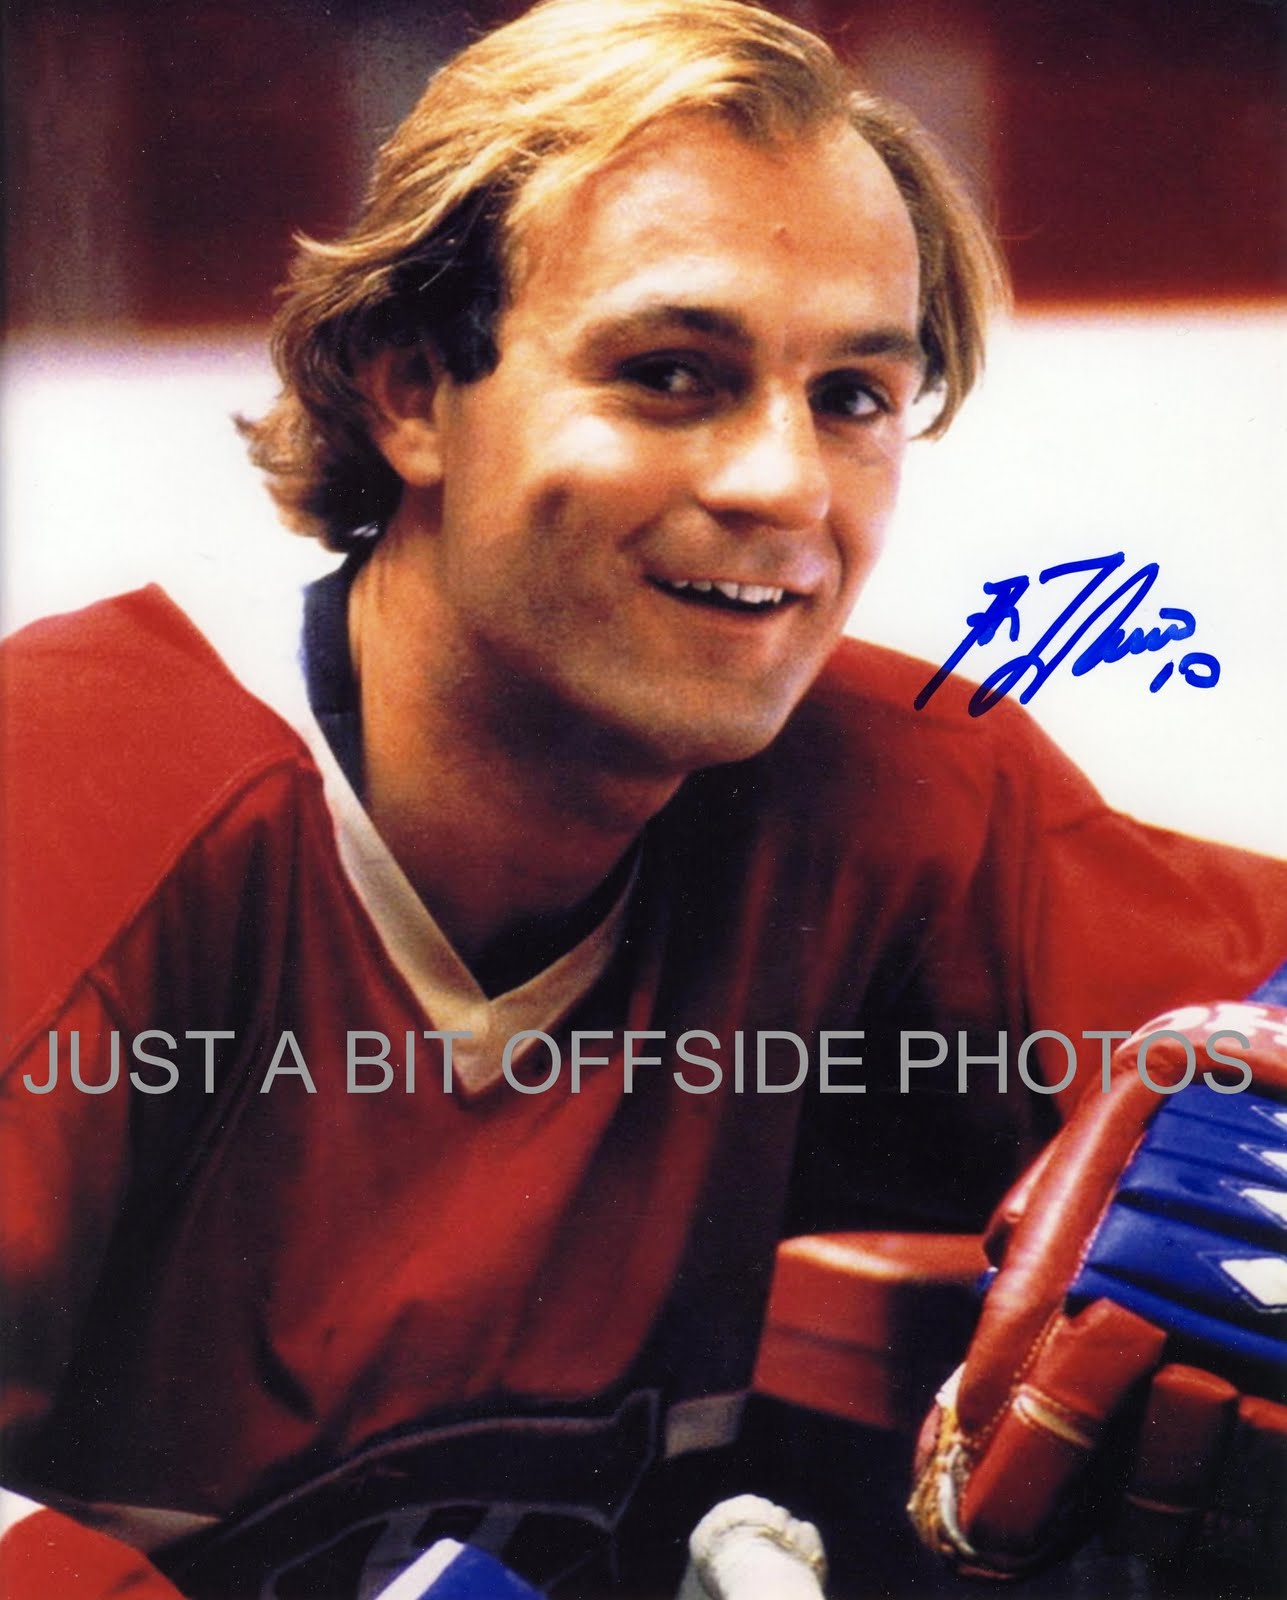 Image result for IMAGE GUY LAFLEUR WITH A CIGARETTE SMOKING